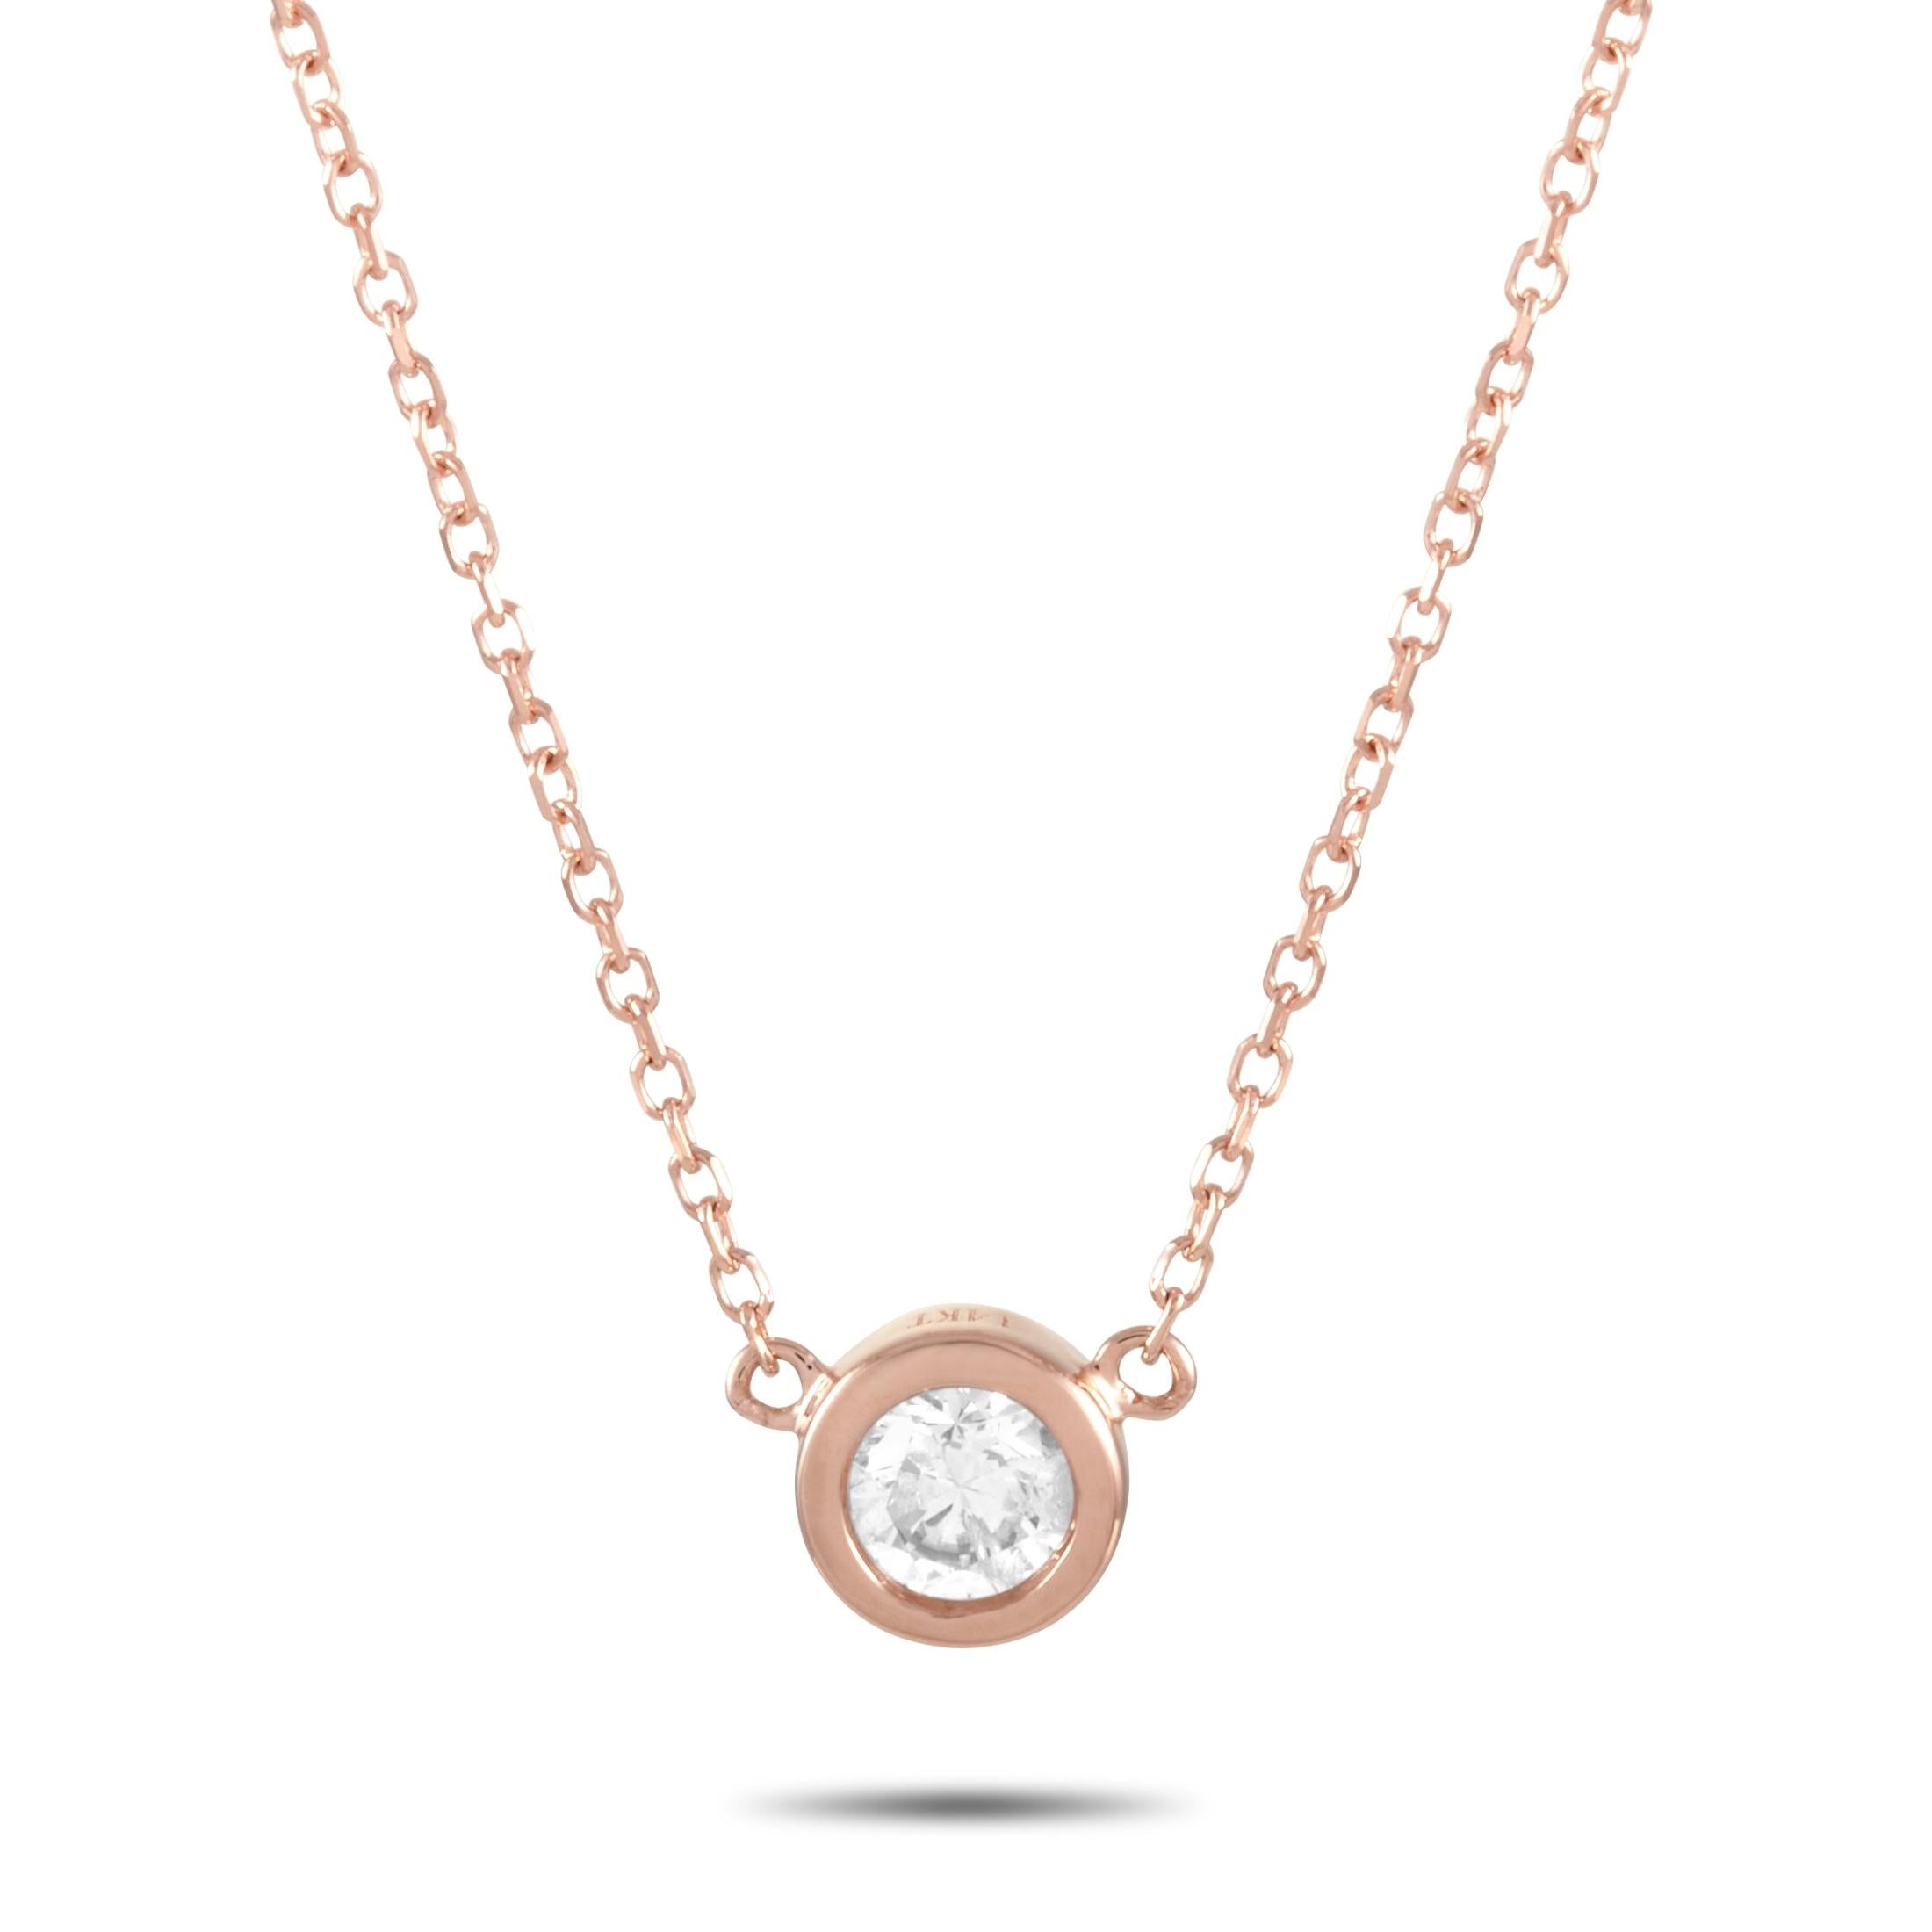 LB Exclusive 14K Rose Gold 0.20 Ct Diamond Pendant Necklace In New Condition For Sale In Southampton, PA